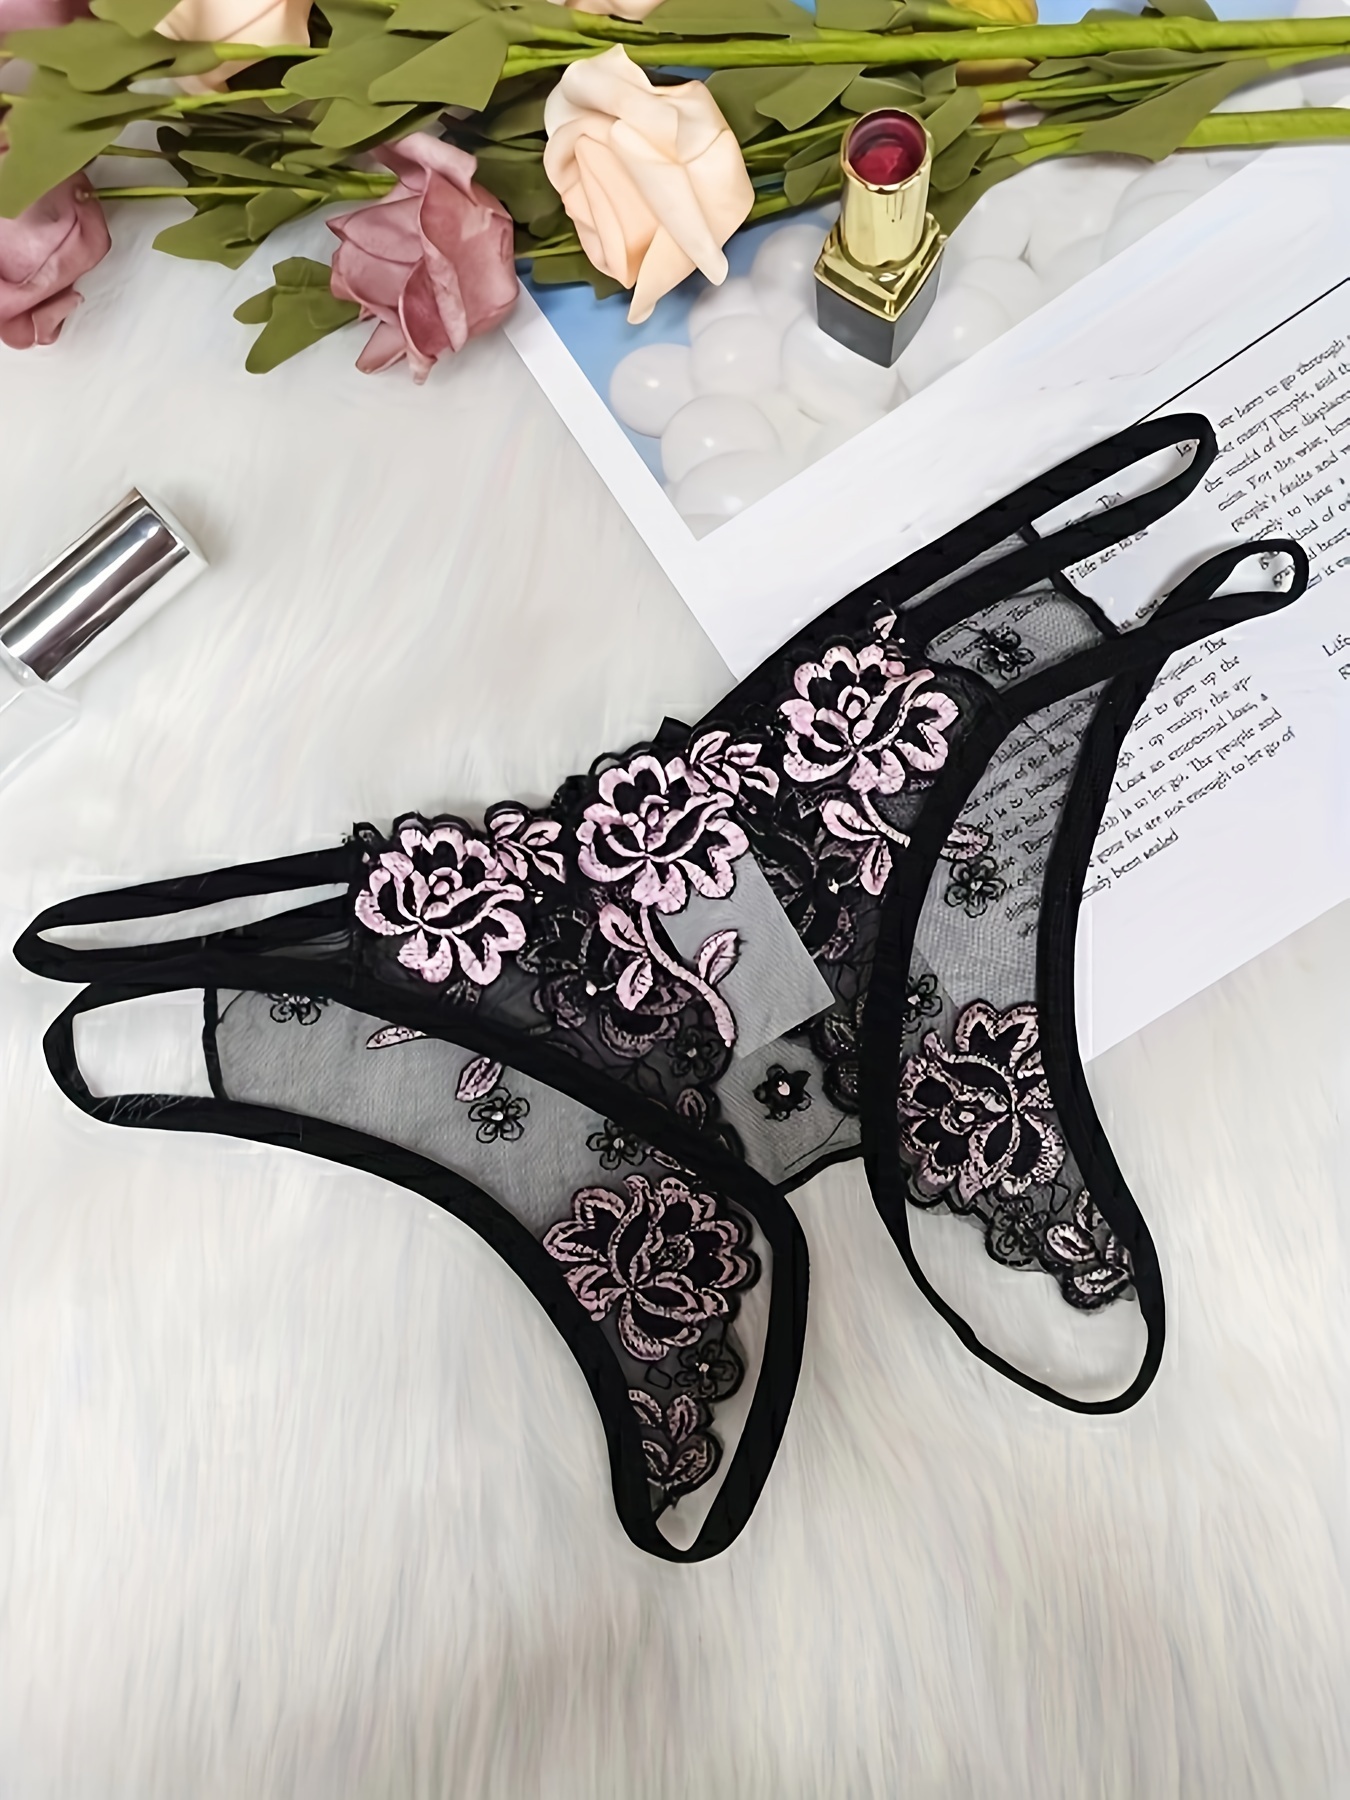 Sexy Women Open Crotch G String Panties Mesh Embroidery Flower Retro Hollow  Out Transparent Thong Underwear Lace Underpatns Bikini G String Briefs From  Harrypotter_jewelry, $1.53